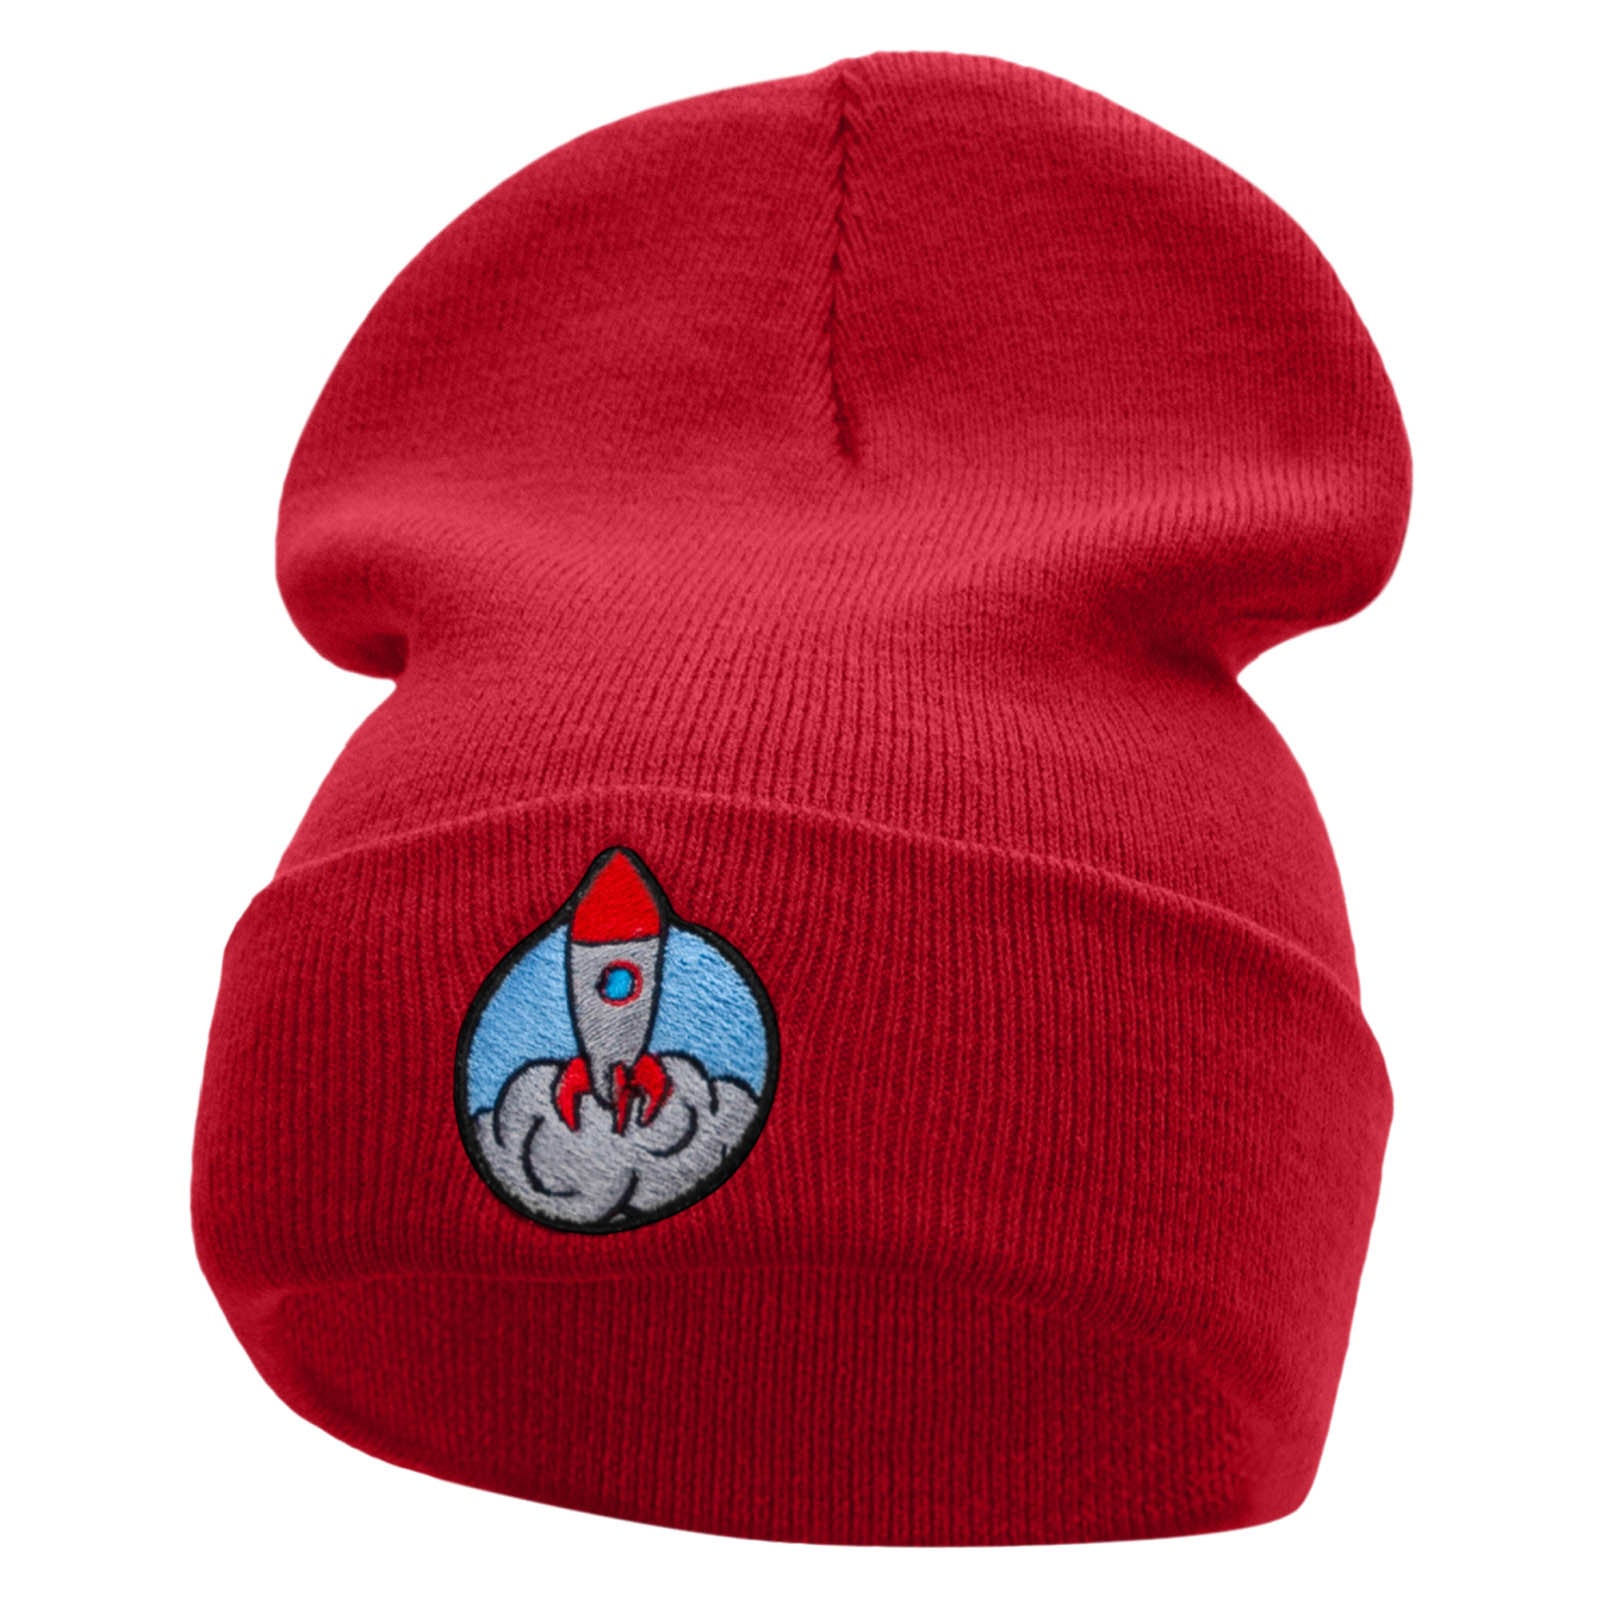 Rocket Takeoff Embroidered 12 Inch Long Knitted Beanie - Red OSFM